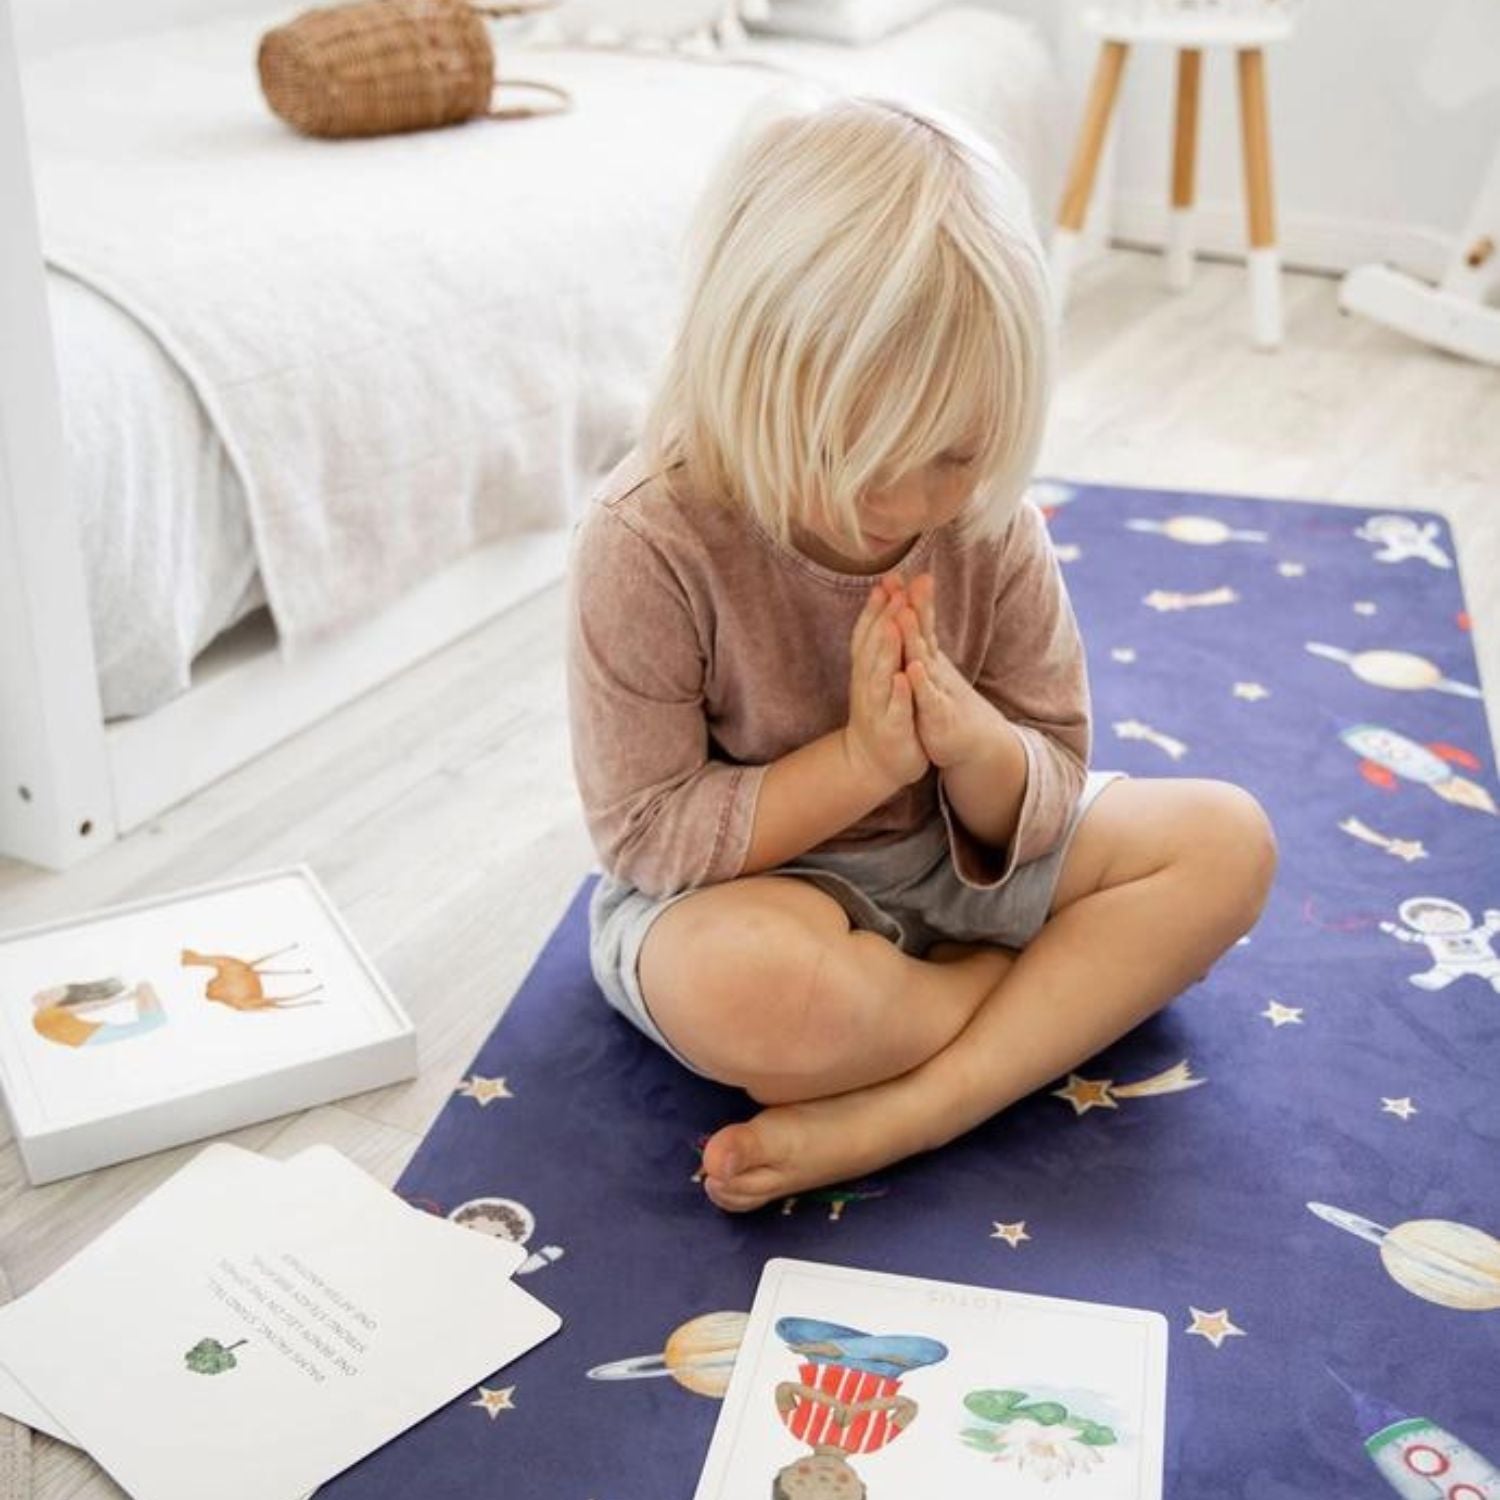 Space Printed Kids Yoga Mat | Eco-Friendly Printed Mat for Children